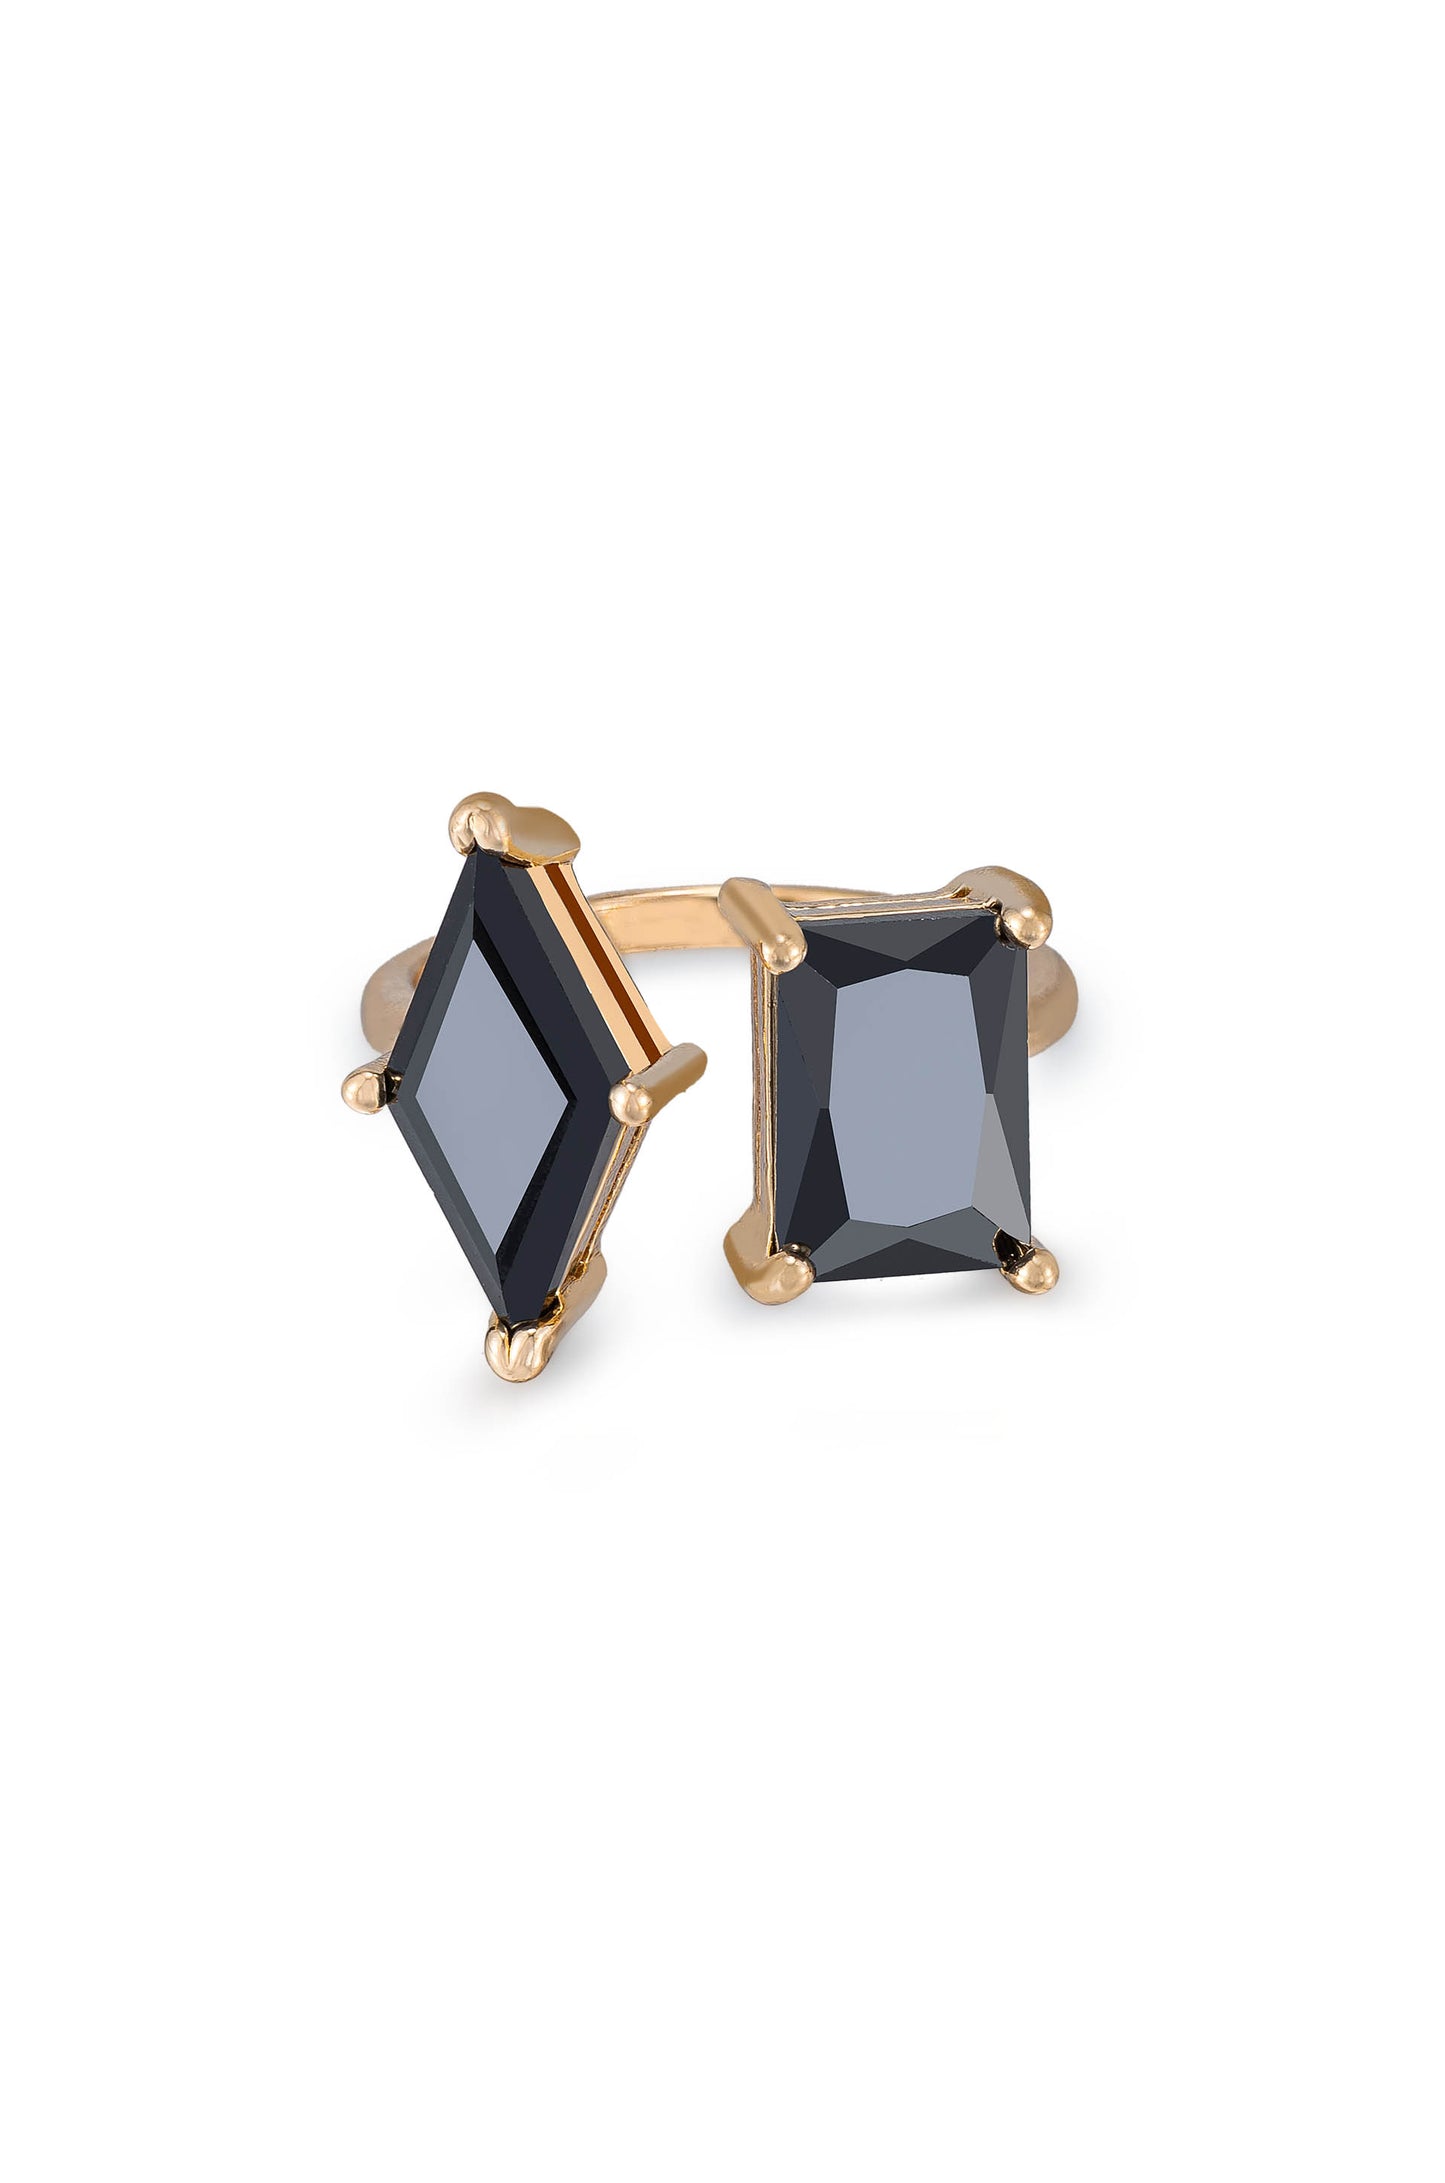 Geometric Statement 18k Gold Plated Ring in black